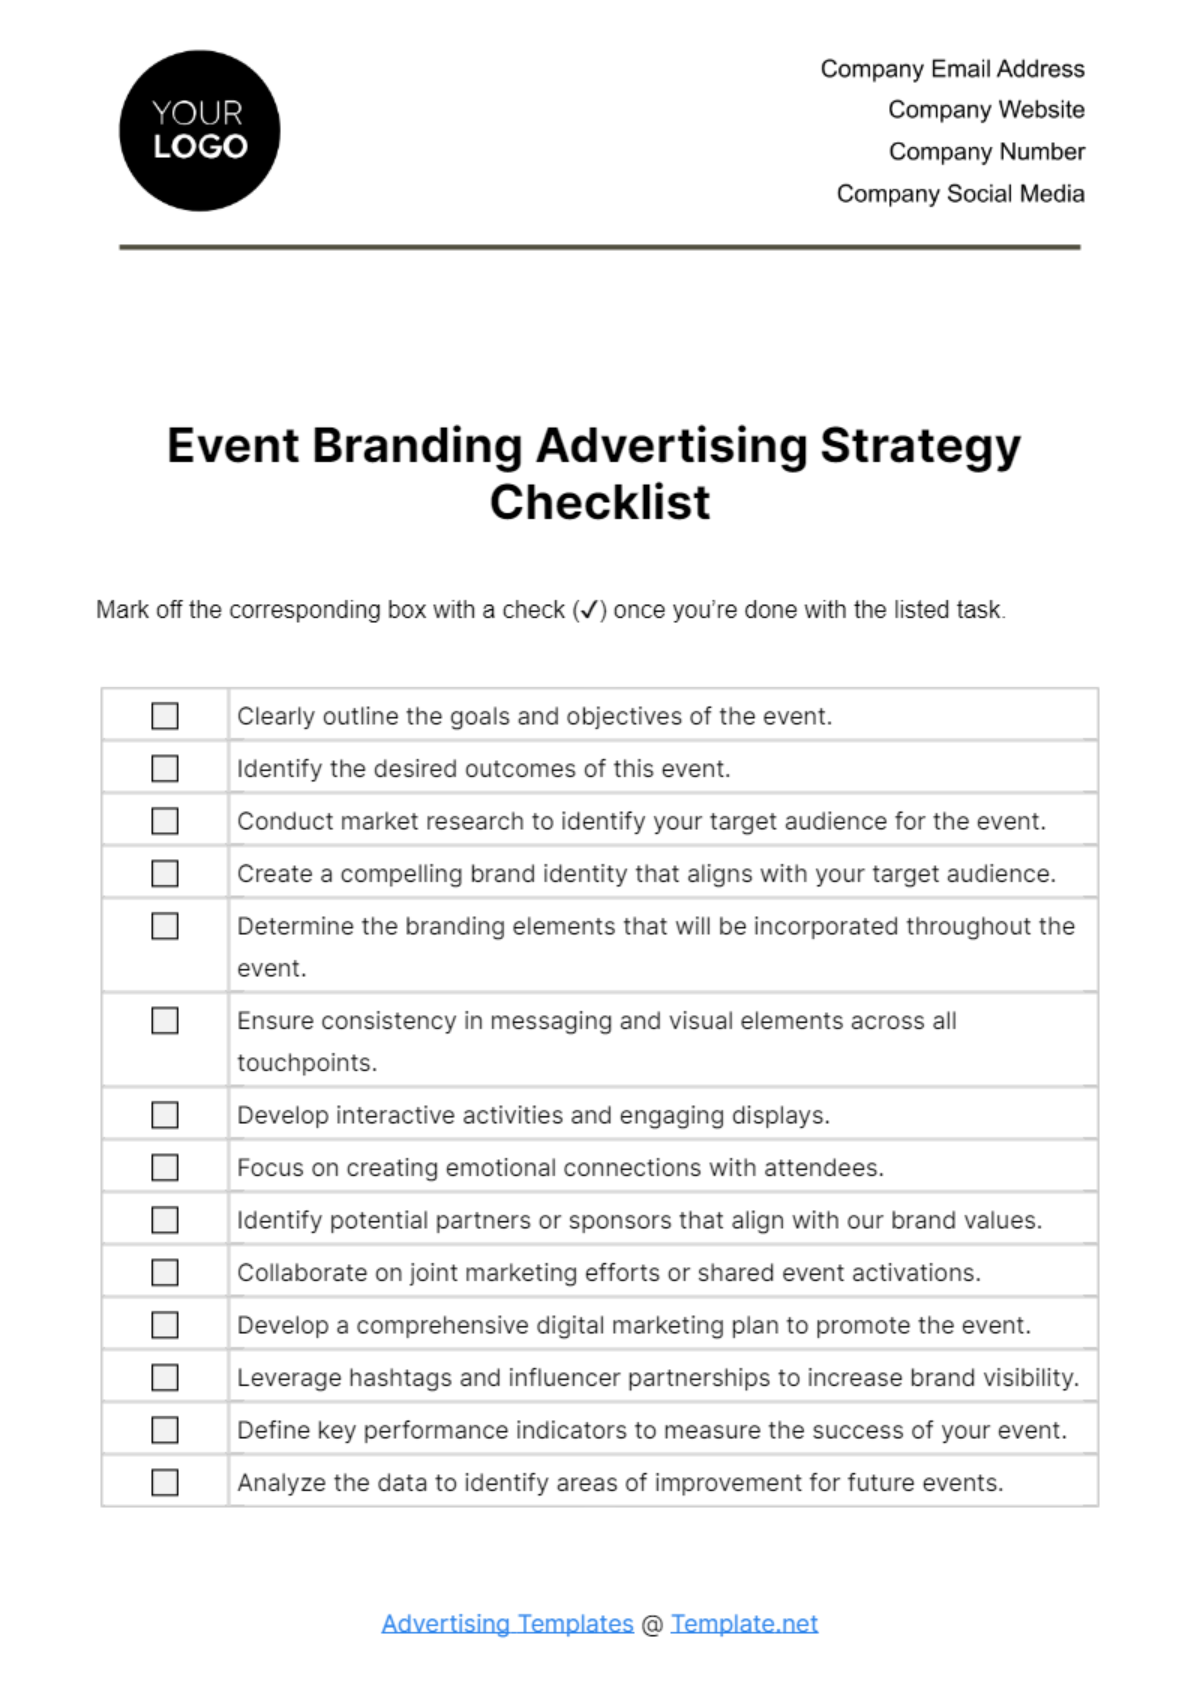 Free Event Branding Advertising Strategy Checklist Template